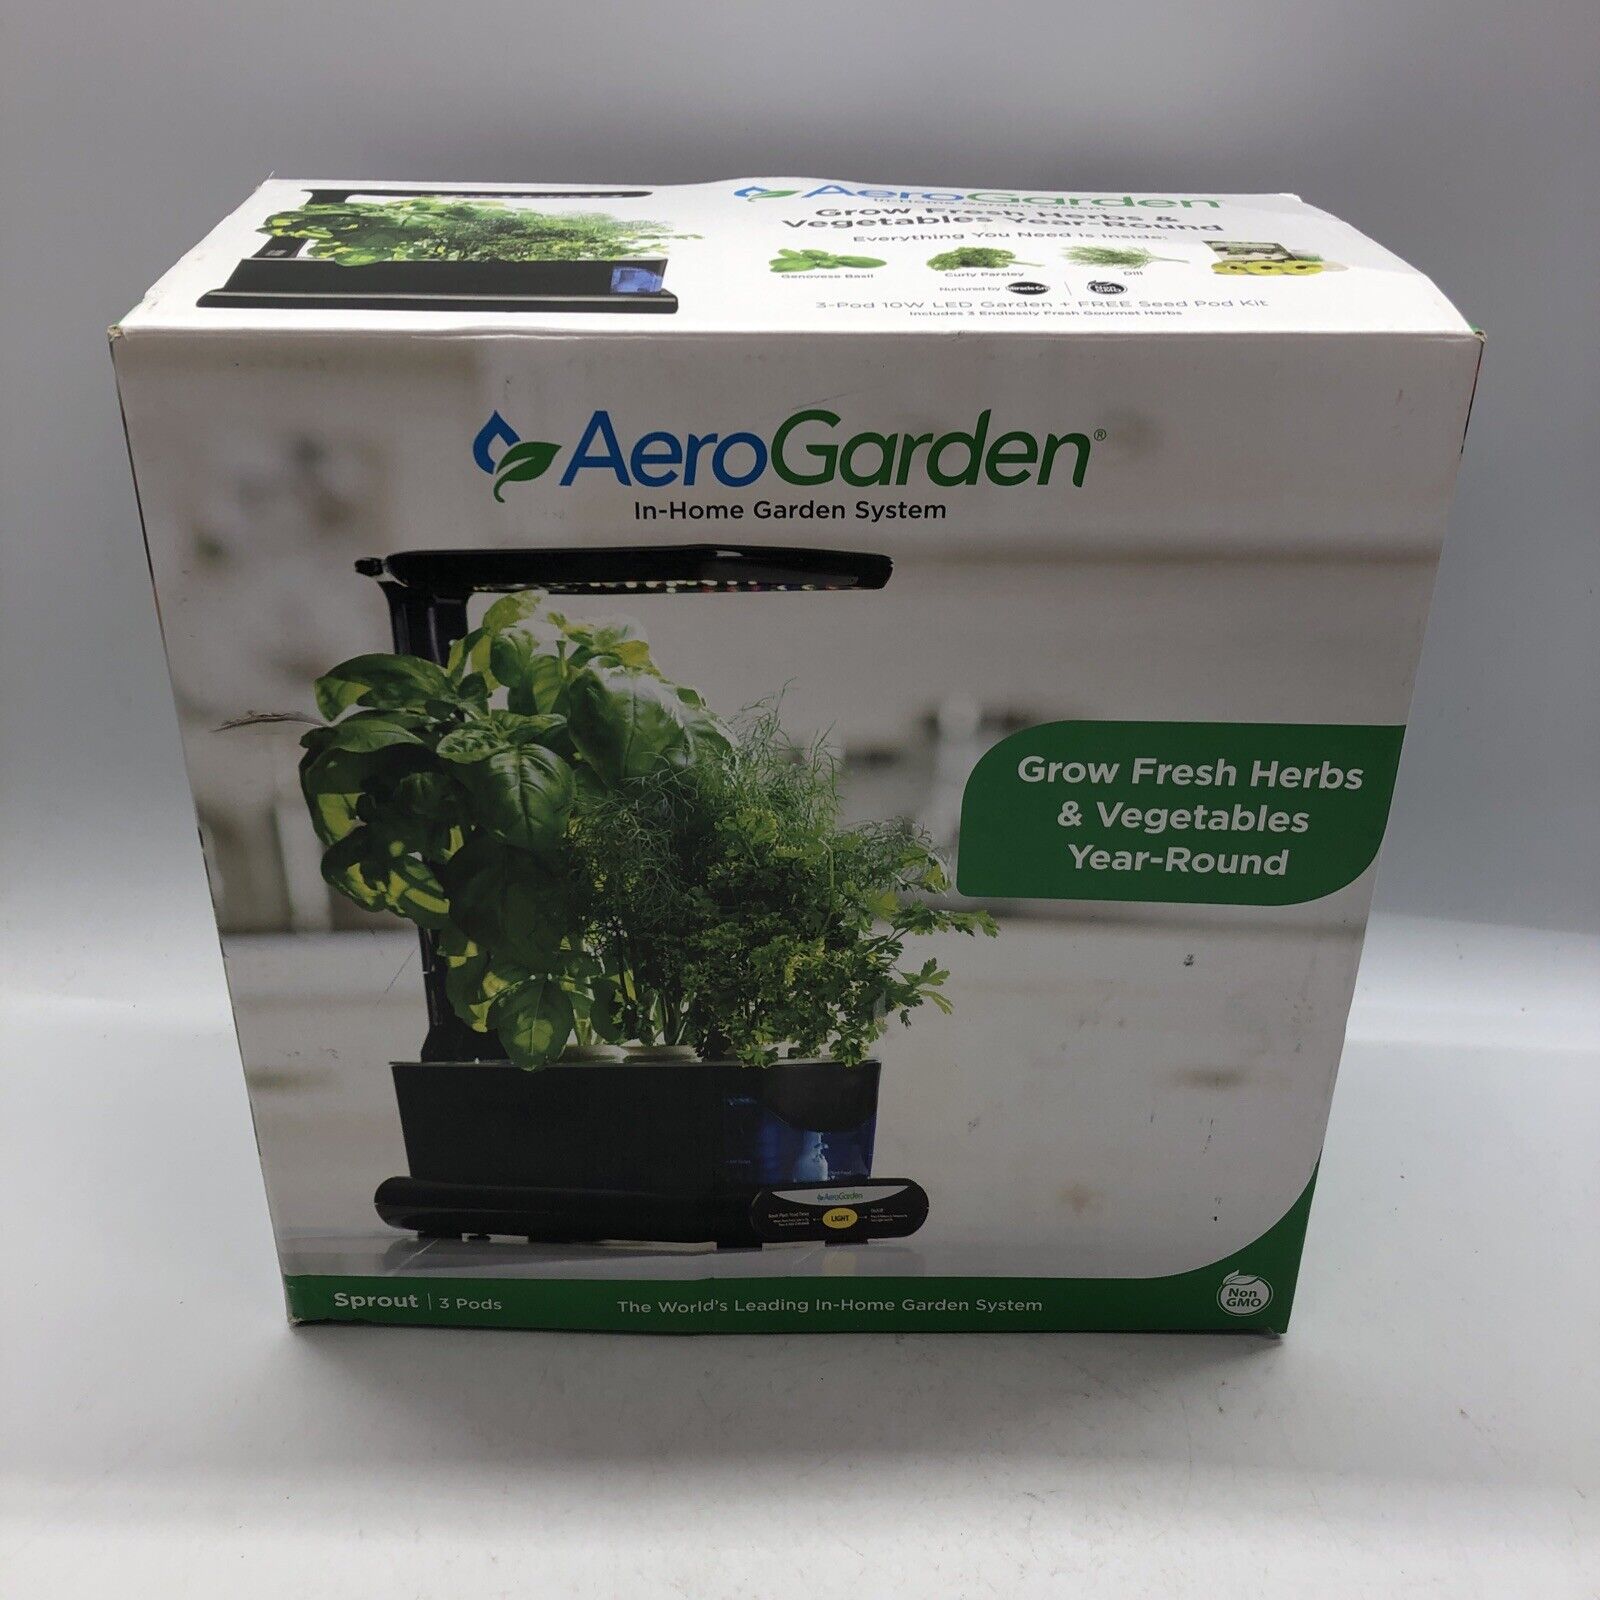 AeroGarden 3-Pod Indoor Sprout LED (no seeds)